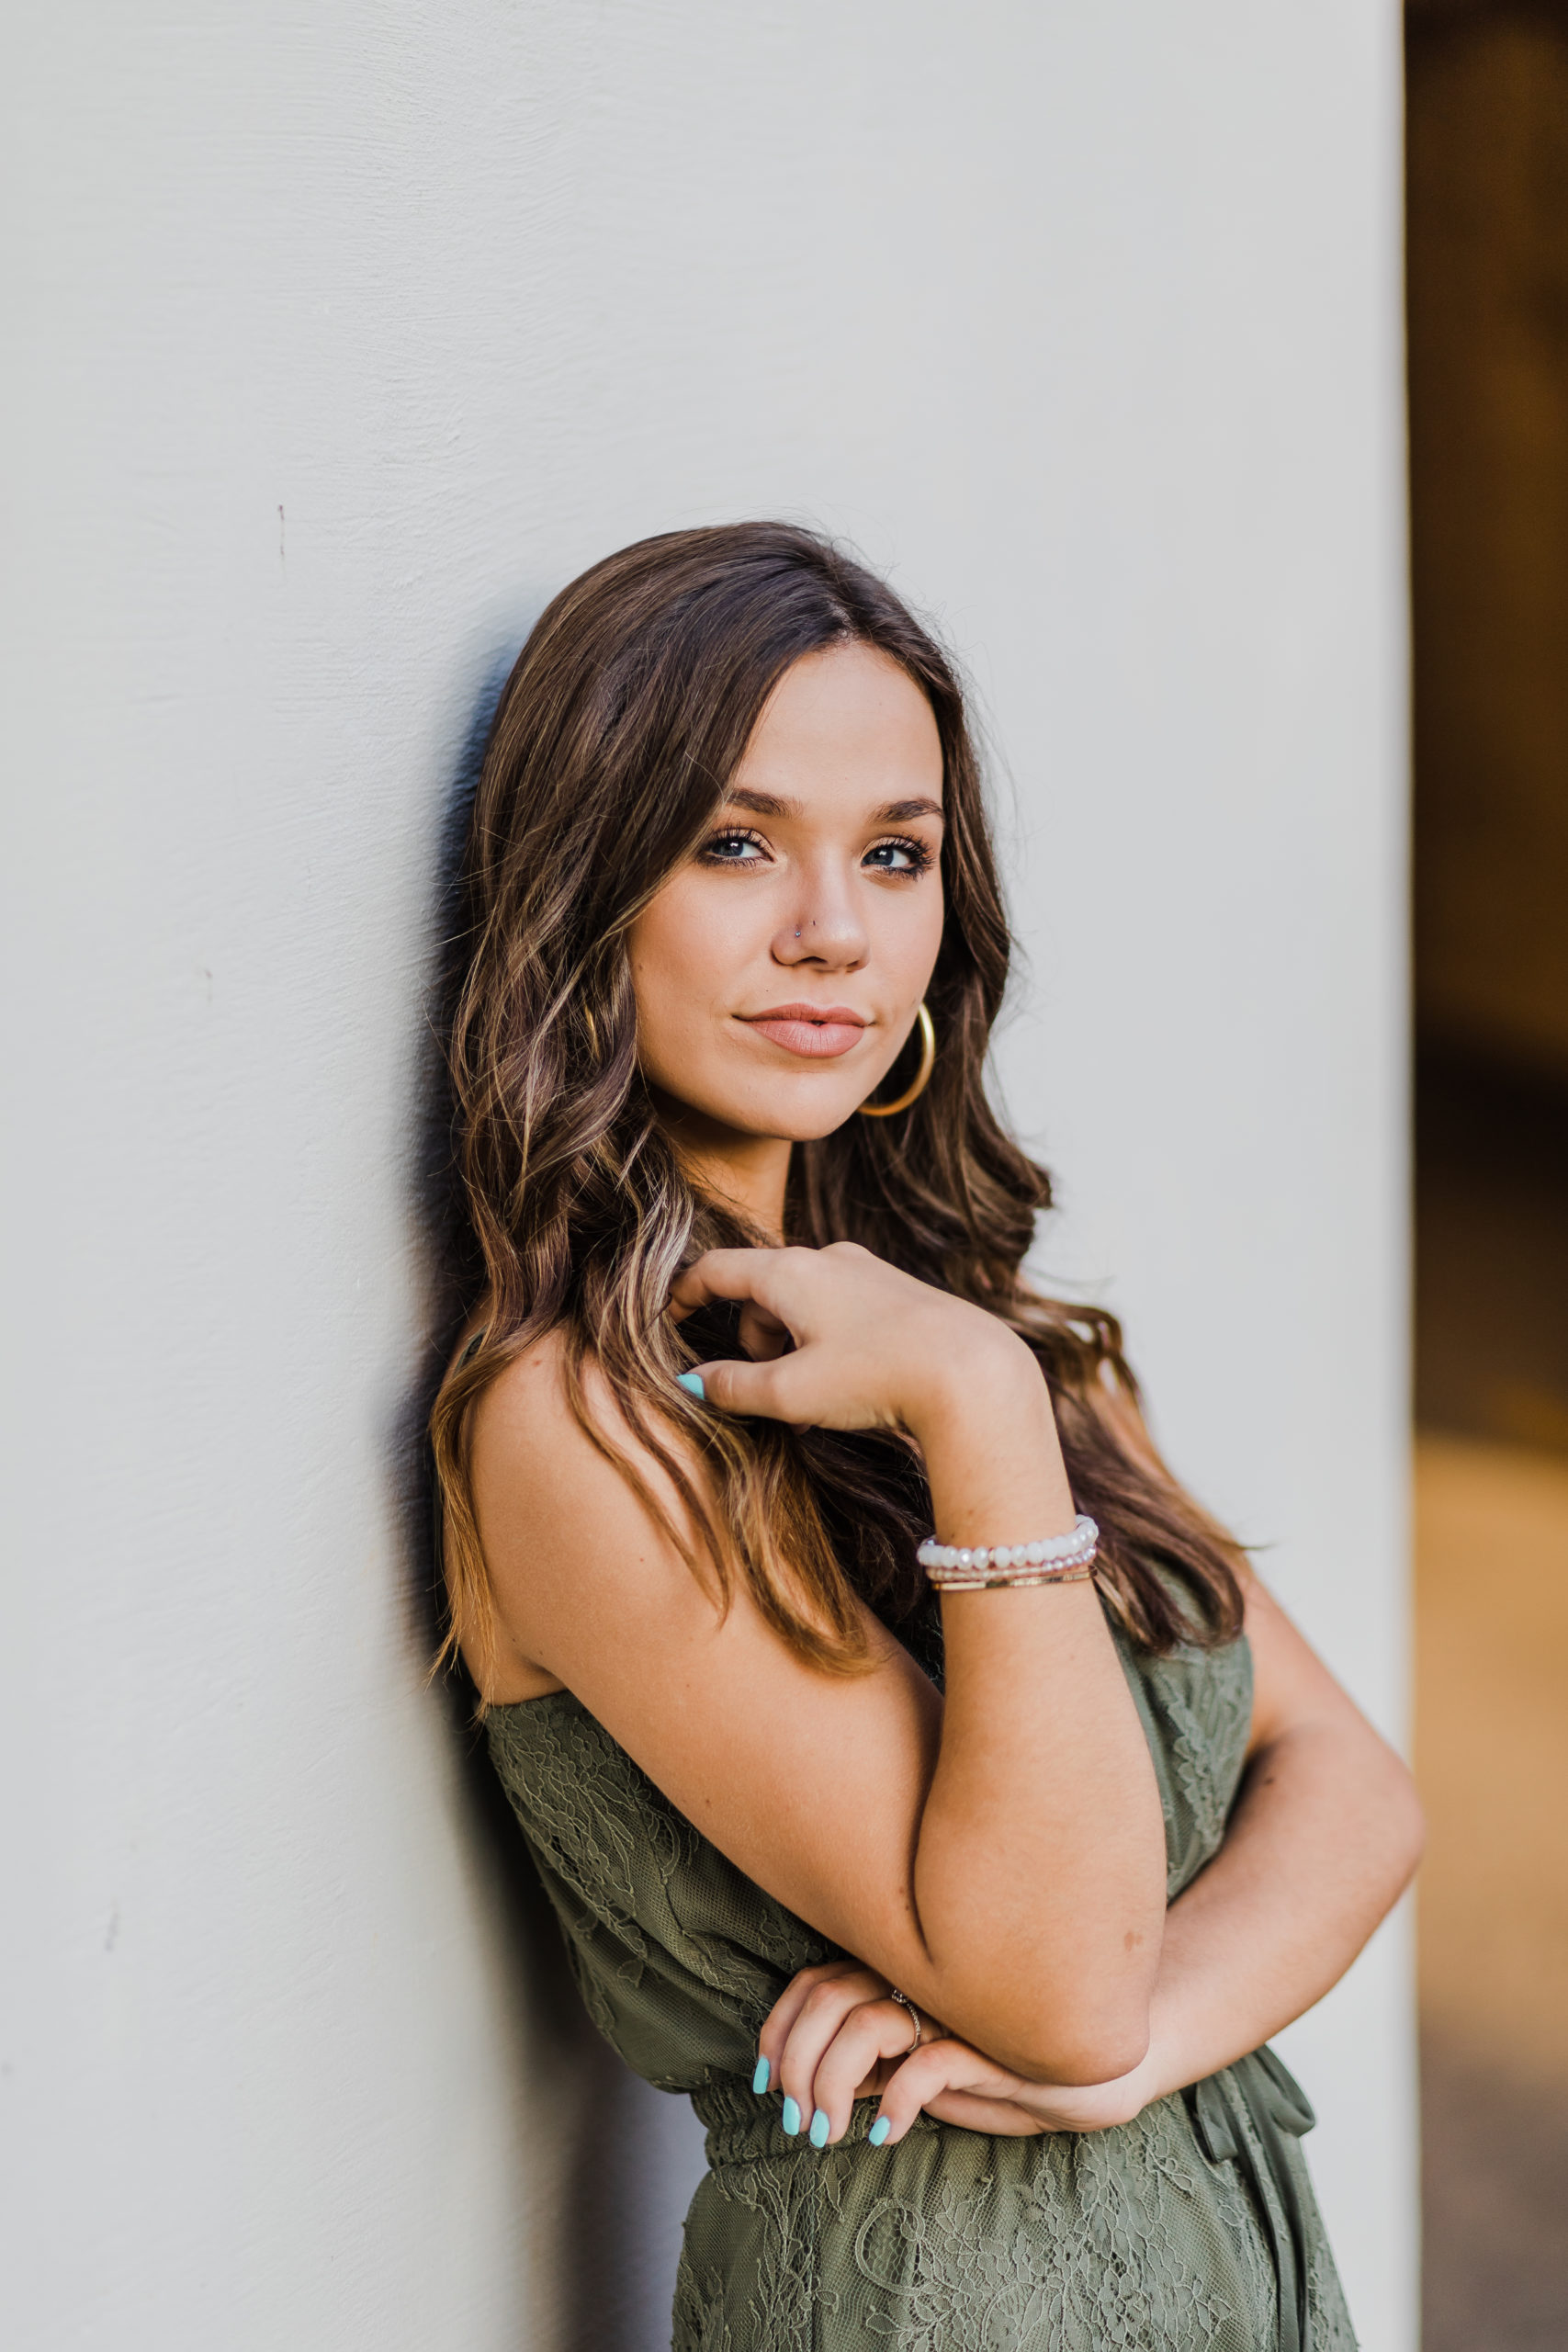 Georgia senior photogrpher captures girl leaning against a wall and holding her hair